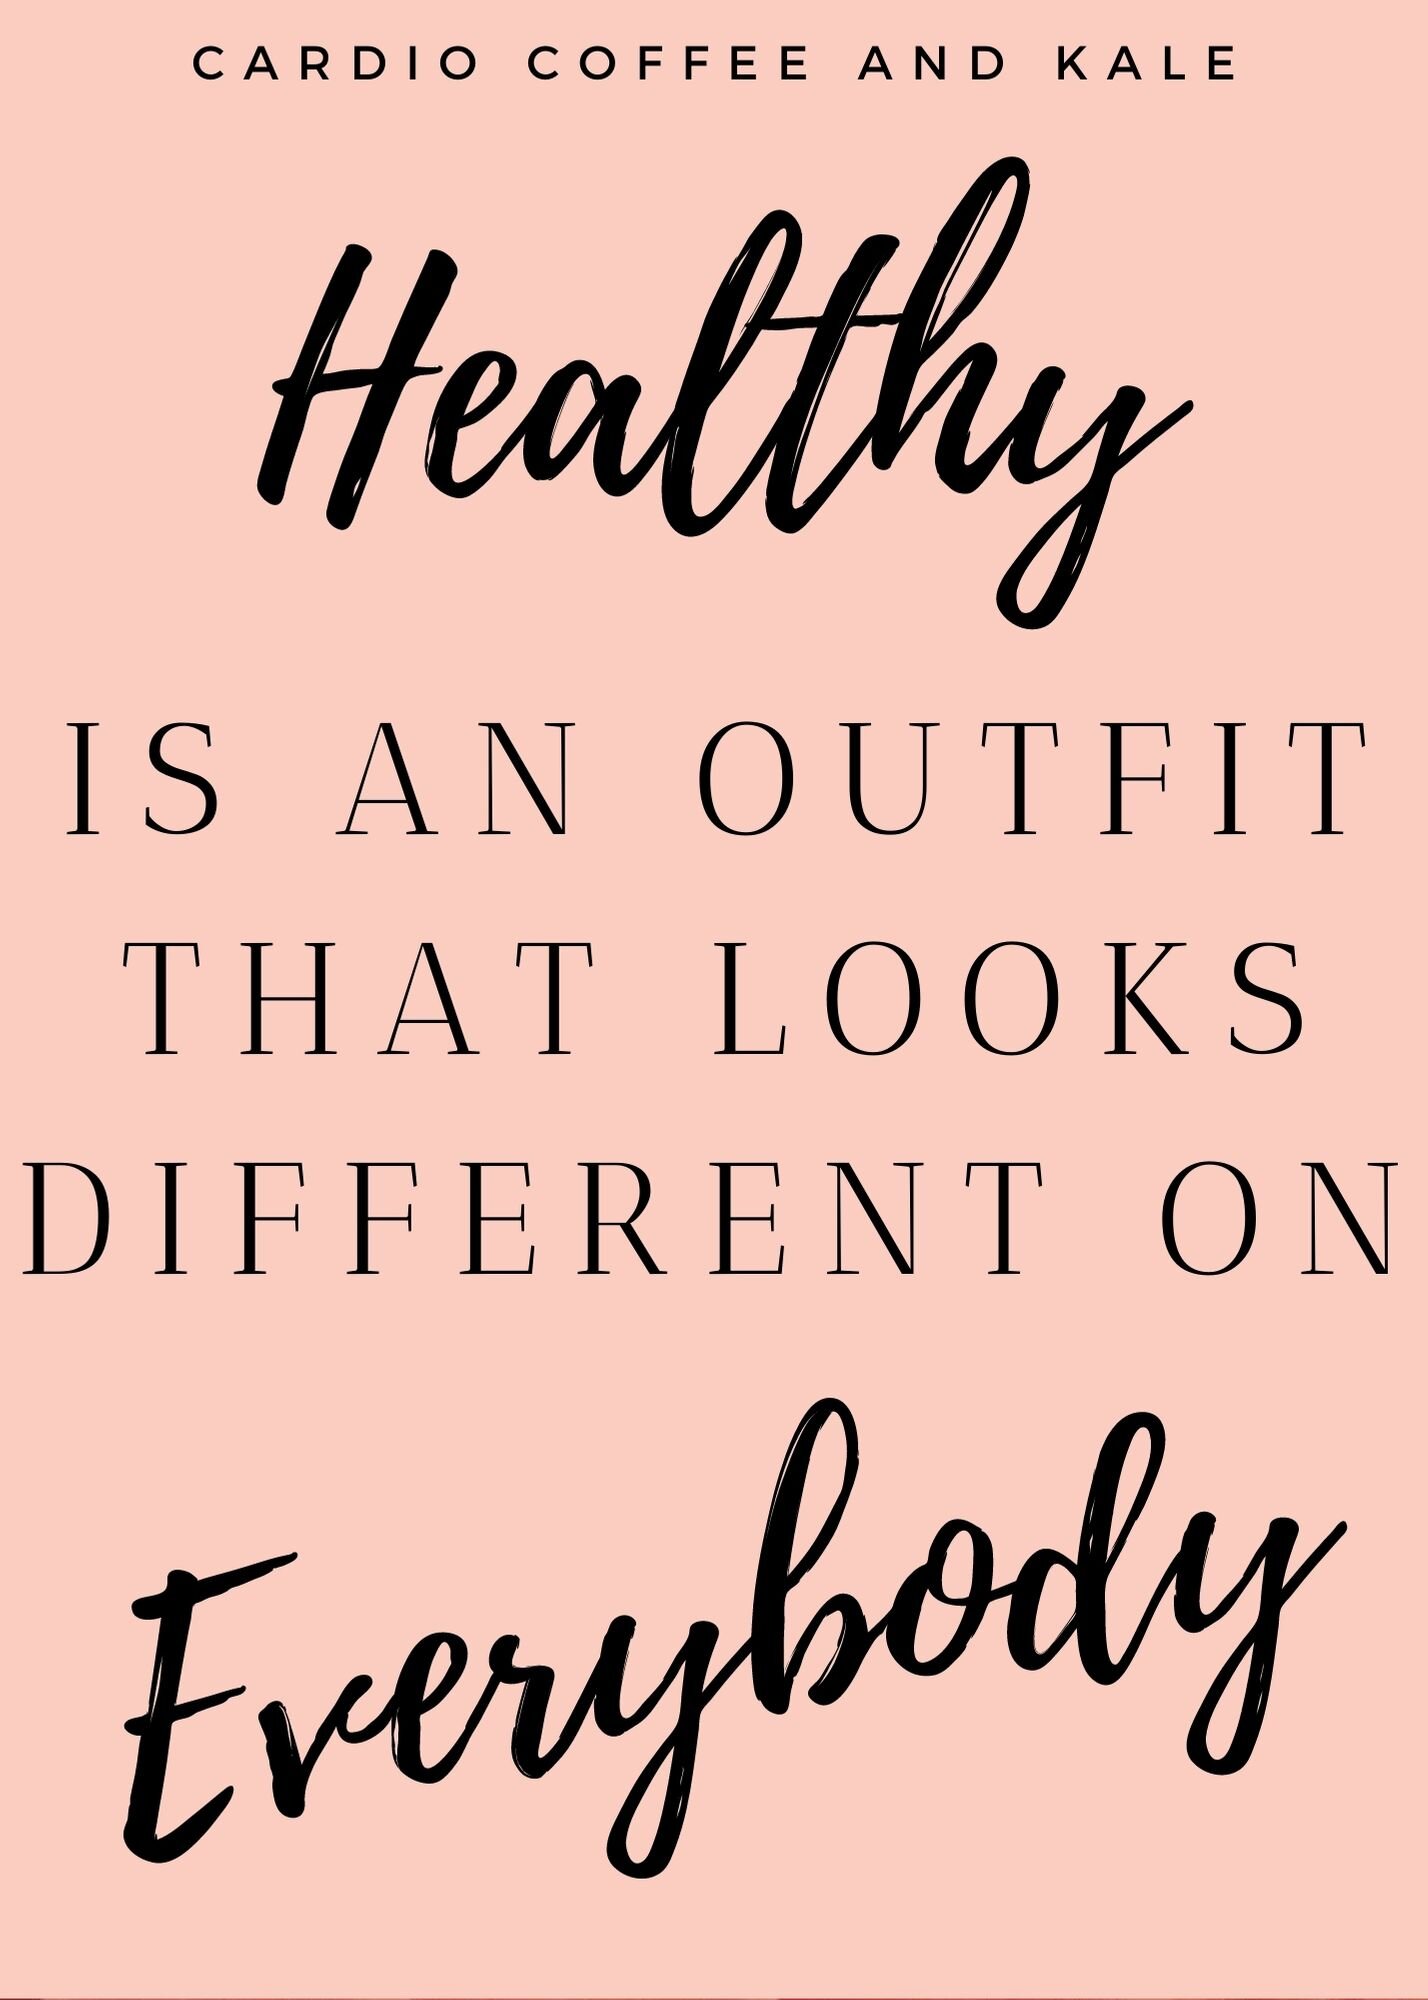 35 Inspirational Health And Fitness Quotes To Print Or Pin — Cardio